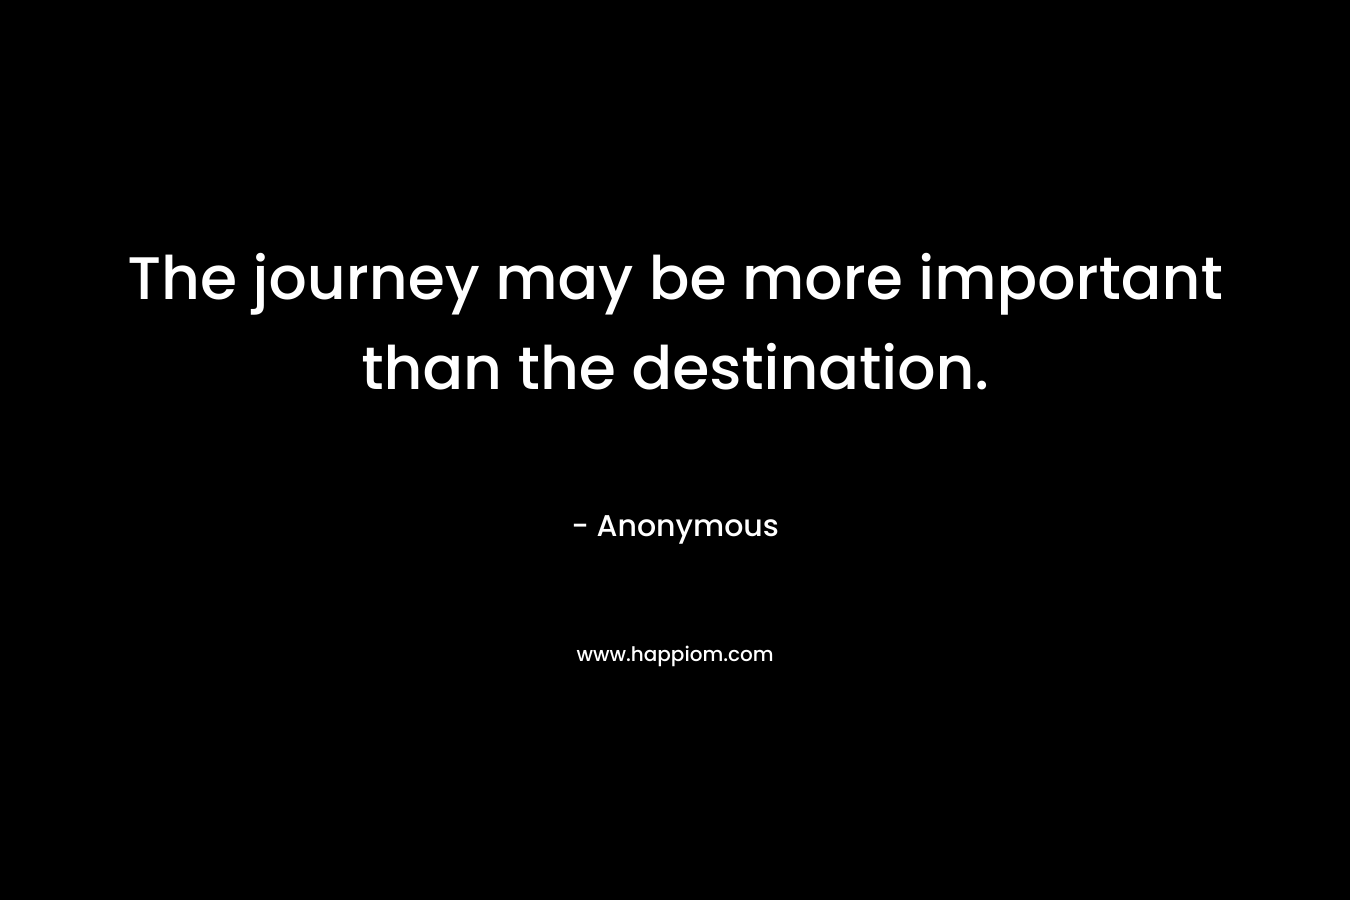 The journey may be more important than the destination.